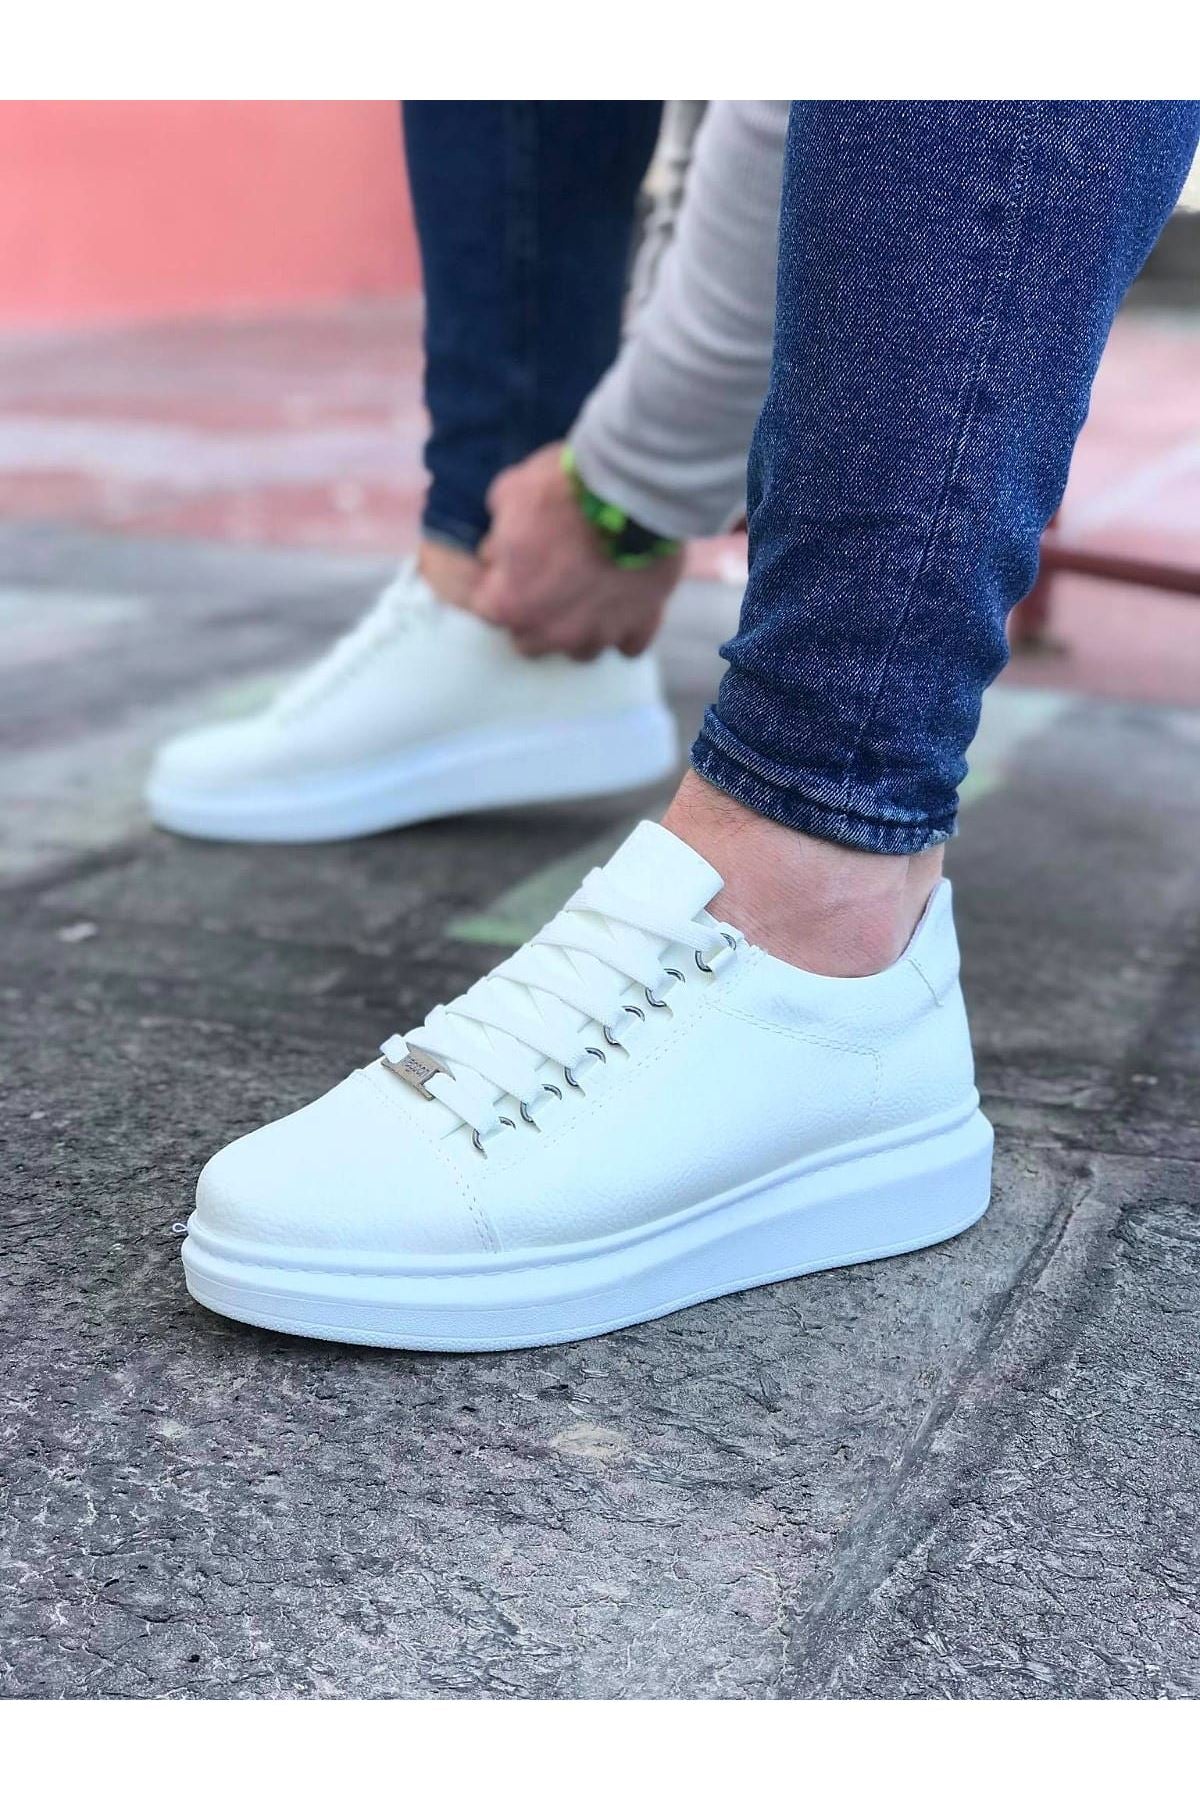 WG08 White Flat Men's Casual Shoes - STREETMODE ™